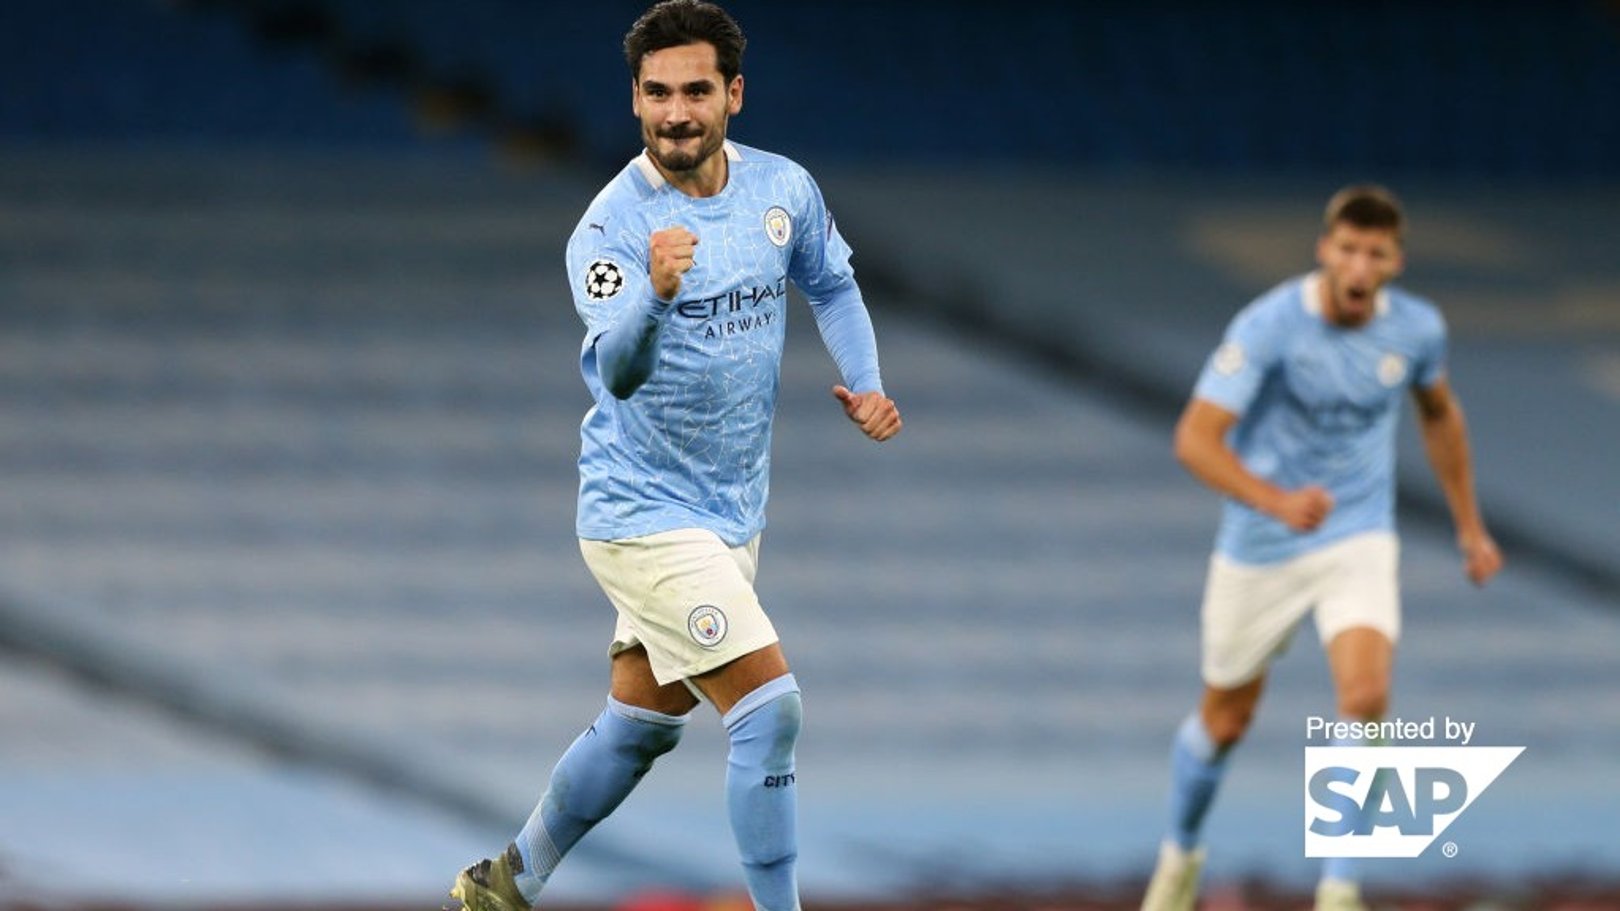 The role of the collective in Gundogan’s standout season